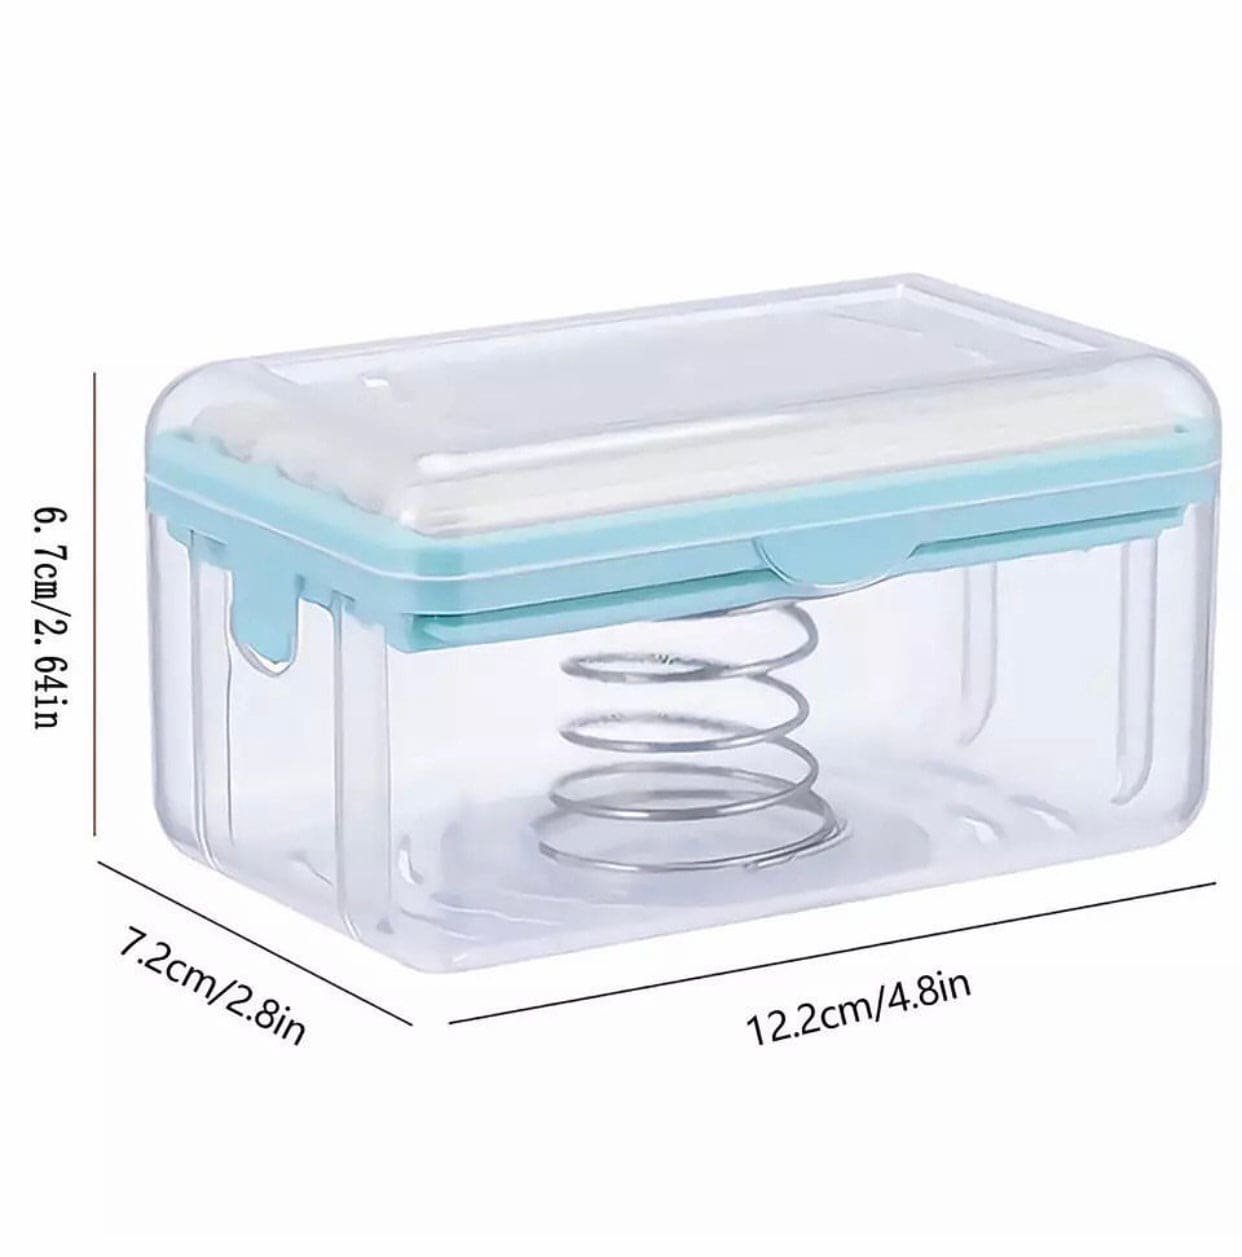 Multifunctional Soap Shower Hand Free Box With Sponge Rollers, Foam Soap Dispenser with Roller and Drain, 2 in 1 Soap Cleaning Storage Foaming Box